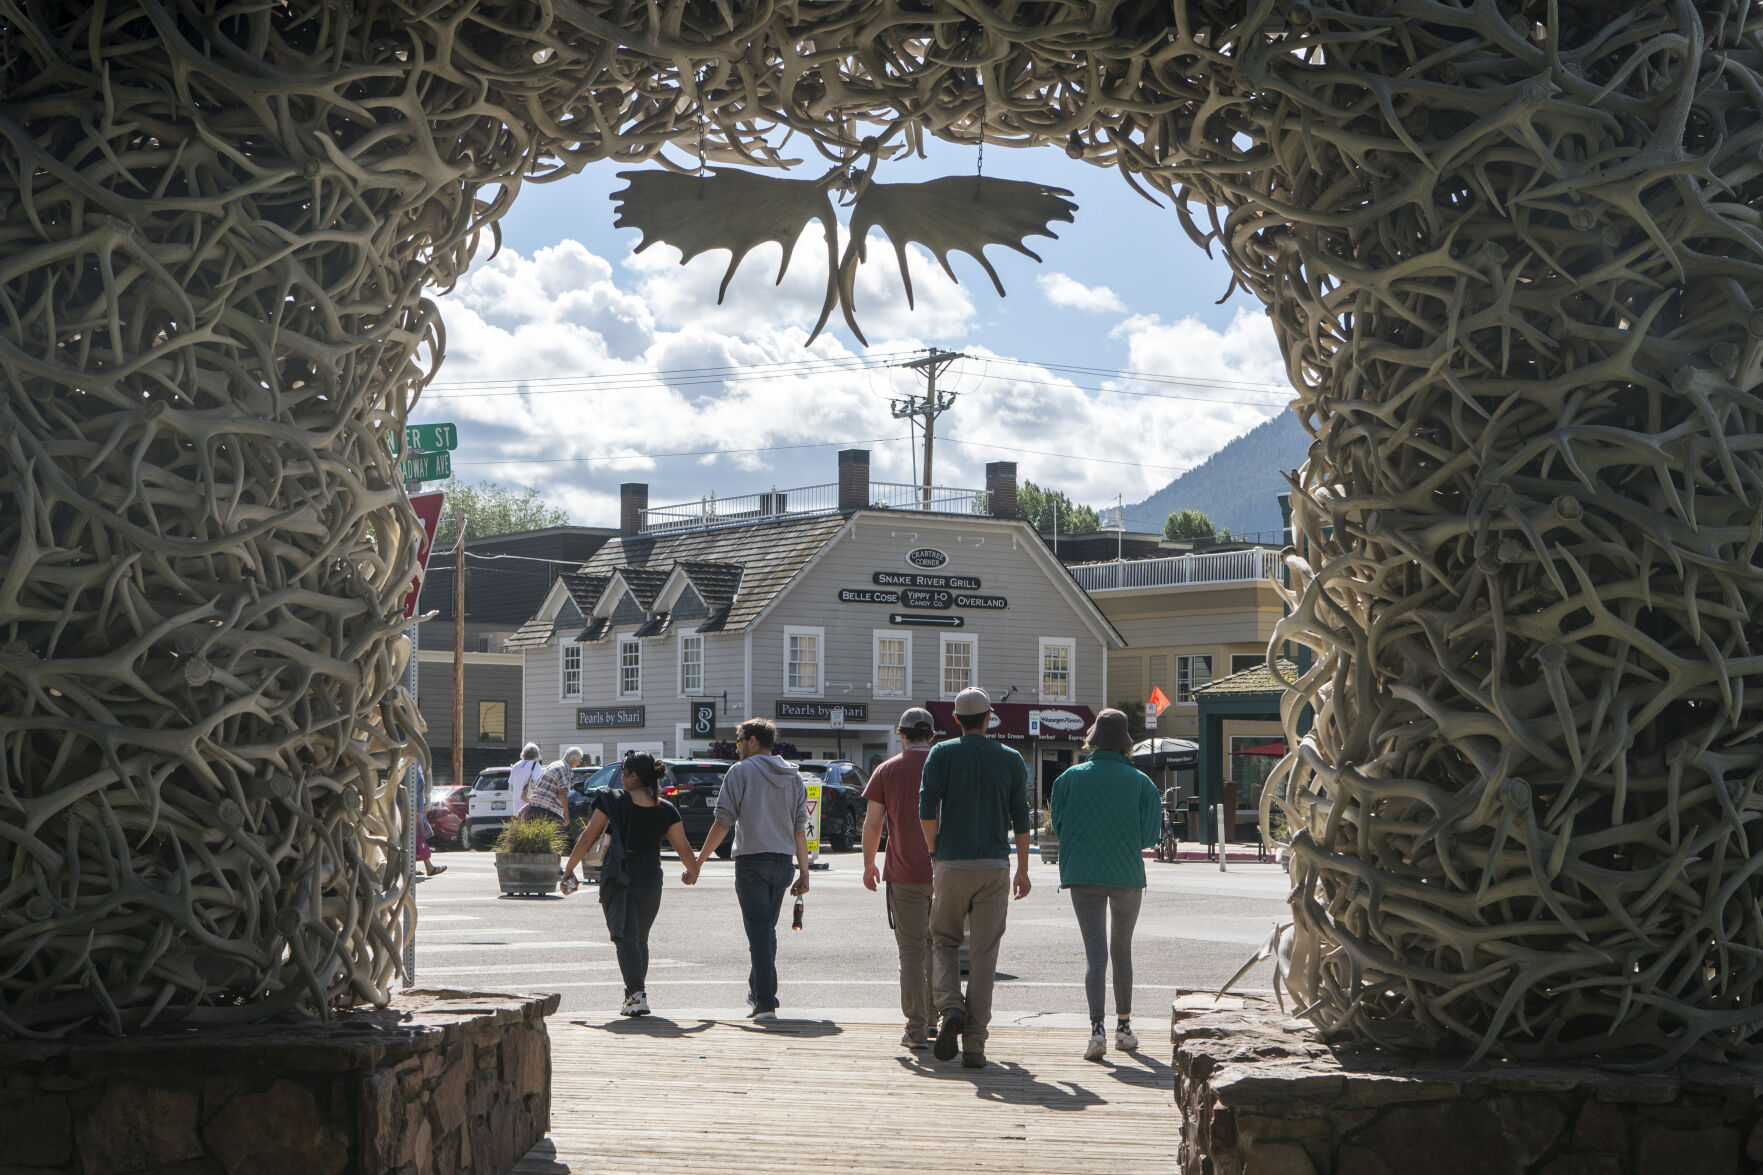 <p>Tourists walk around Town Square in Jackson, Wyo. on Aug. 23, 2023. When Federal Reserve Chair Jerome Powell delivers a high-profile speech Friday in Jackson Hole, many analysts think he could make one thing clear: That the Fed plans to keep its benchmark interest rate at a peak level for longer than had been expected. (AP Photo/Amber Baesler)</p>   PHOTO CREDIT: Amber Baesler - freelancer, ASSOCIATED PRESS